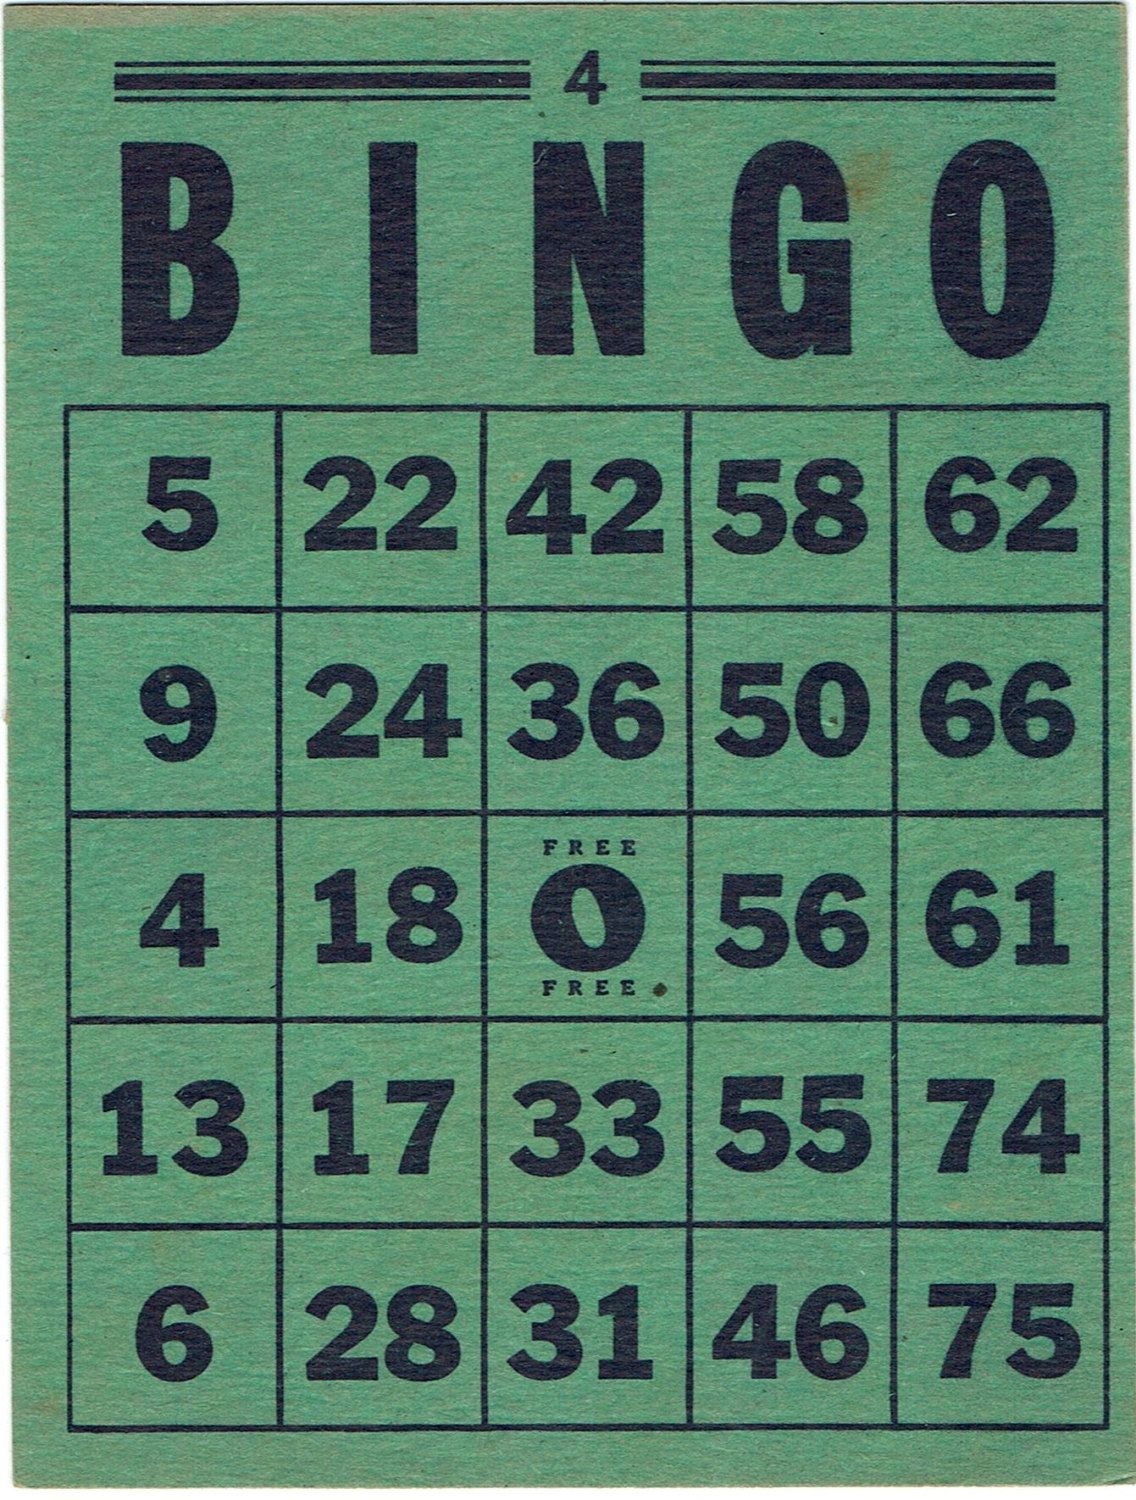 Vintage Bingo Card - Green And Blackassemblager On Etsy